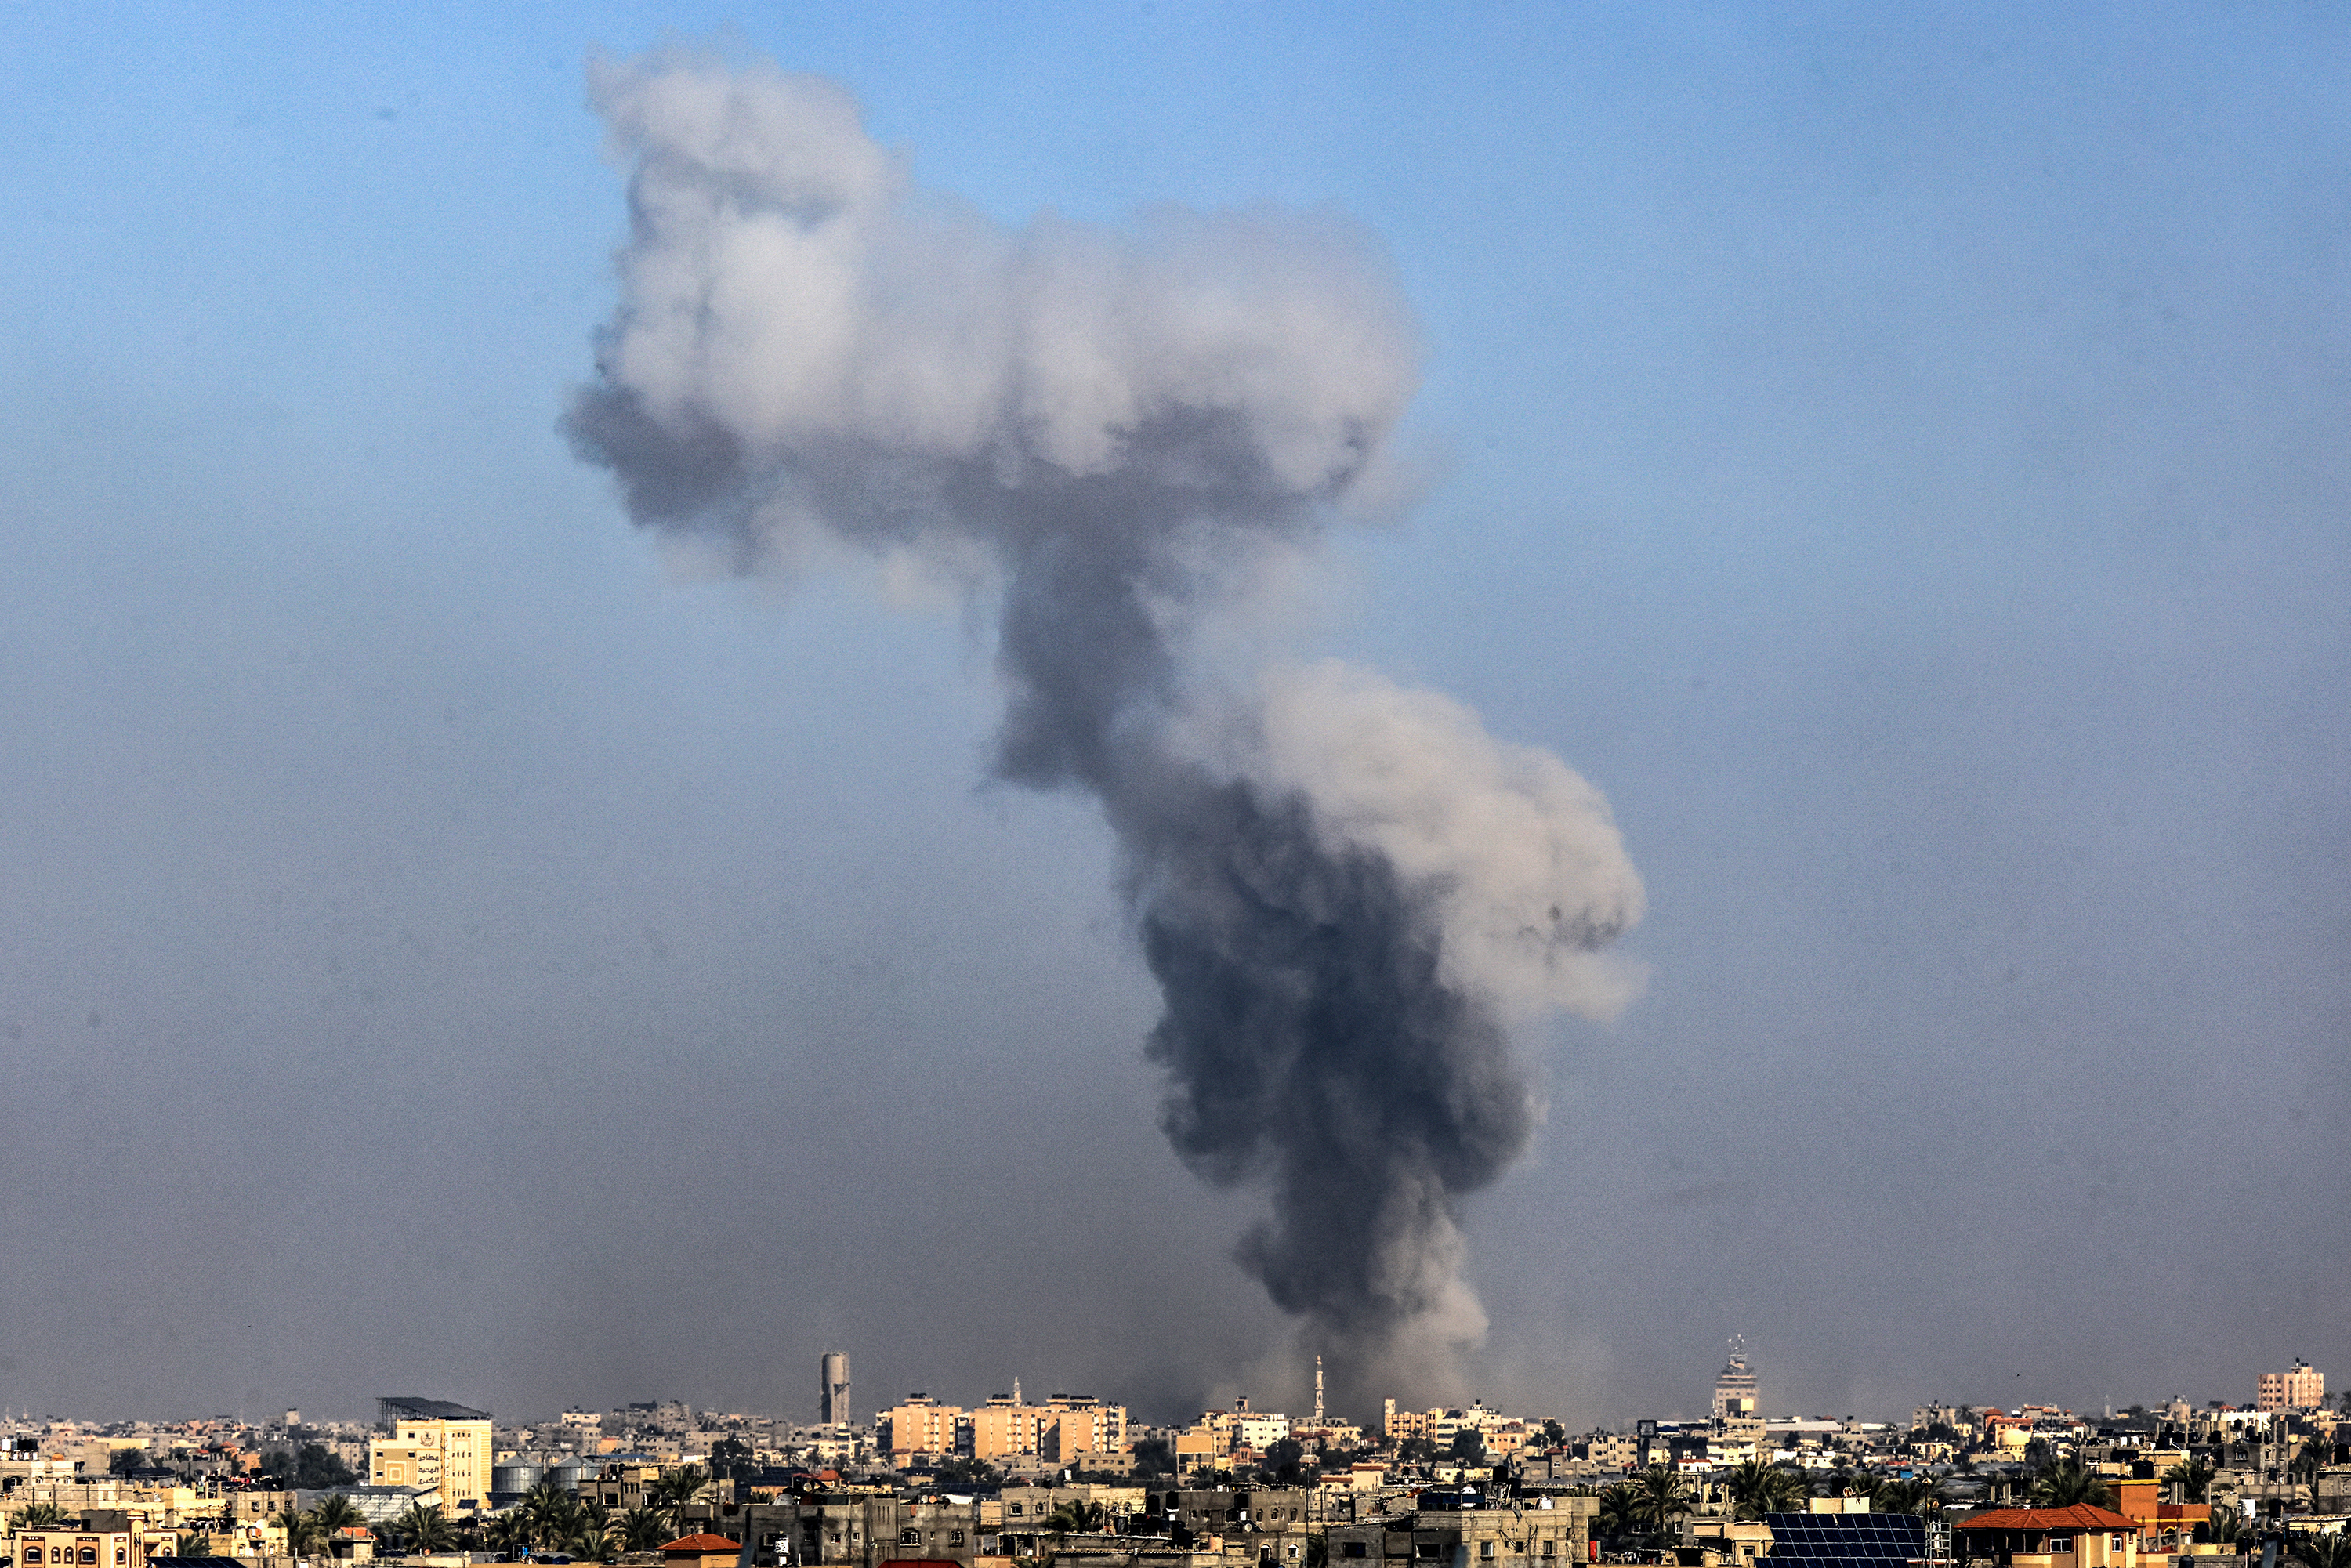 A photo taken from Rafah, Gaza, on January 6 shows smoke billowing over Khan Younis, Gaza, during an Israeli bombardment.